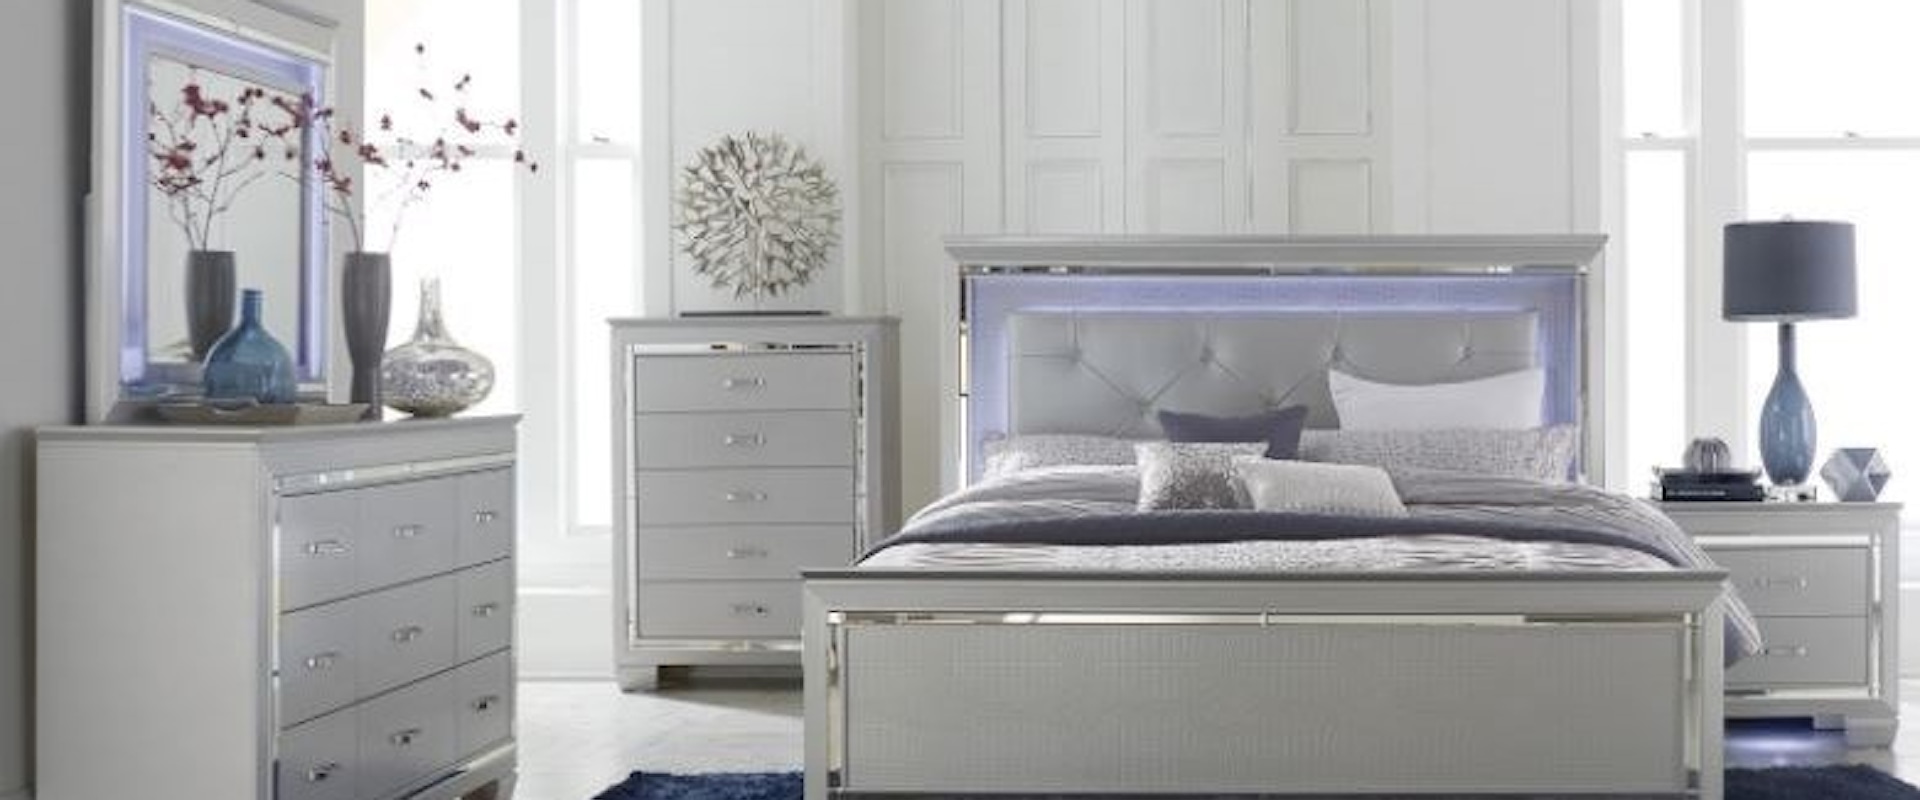 Glam 5-Piece King Bedroom Group